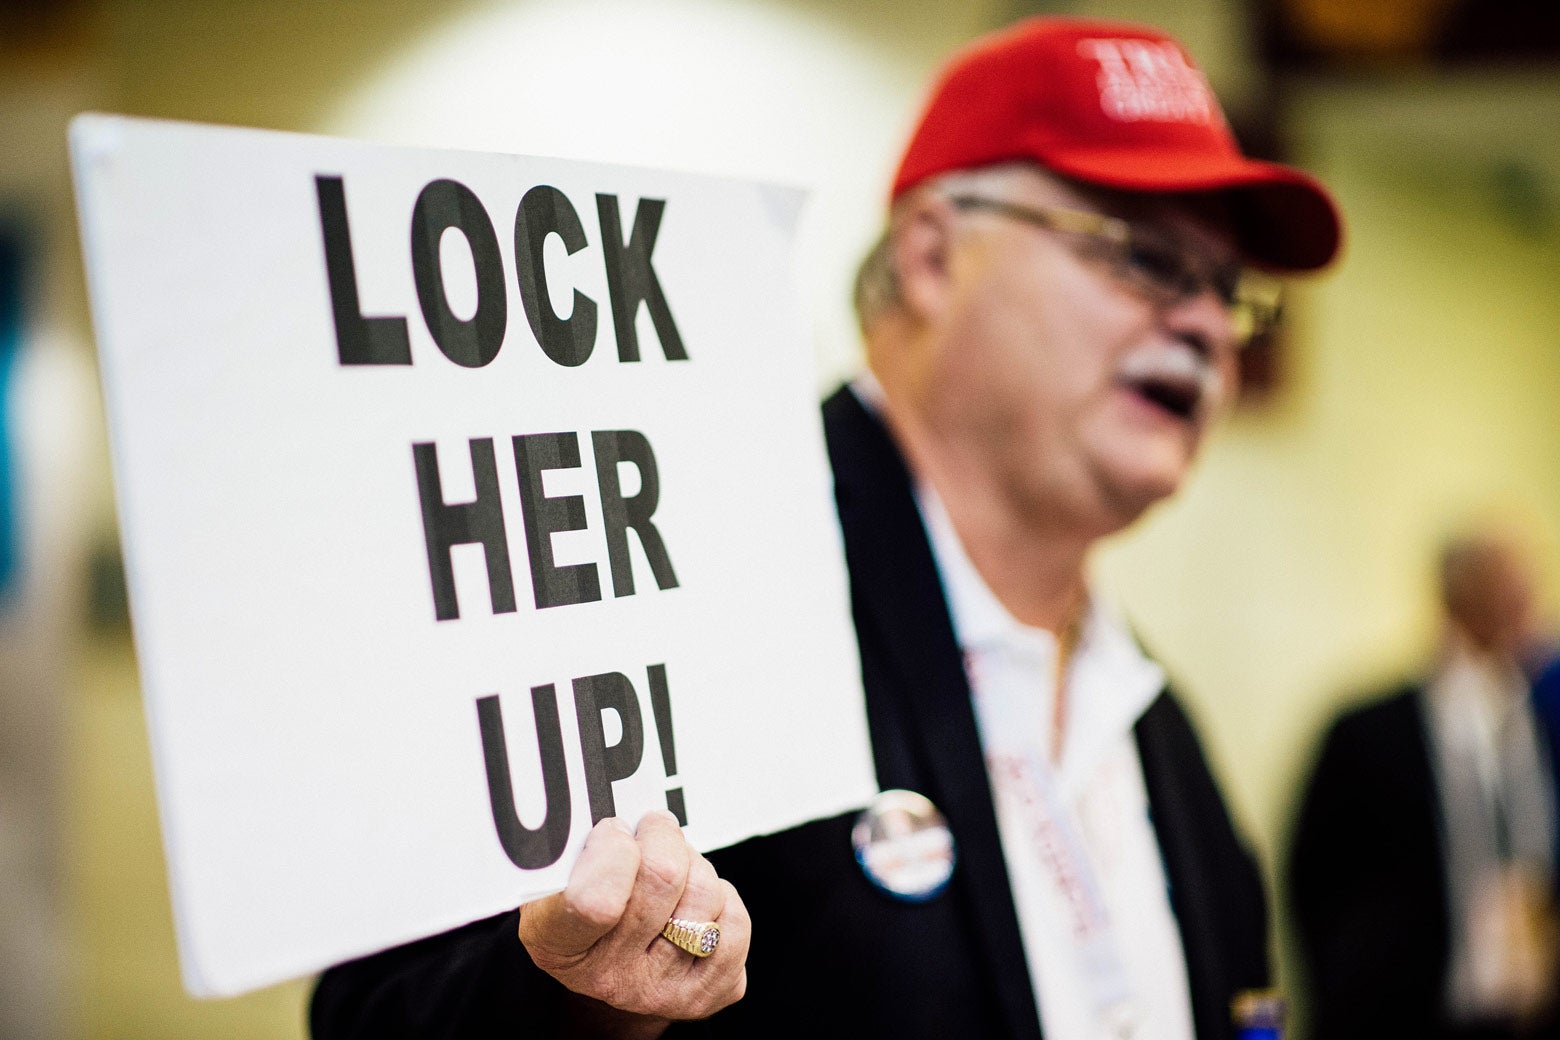 Florida delegate Henry Allen carries a Lock Her Up sign through the Quicken Loans Arena at the 2016 Republican National Convention in Cleveland on July 20, 2016. 